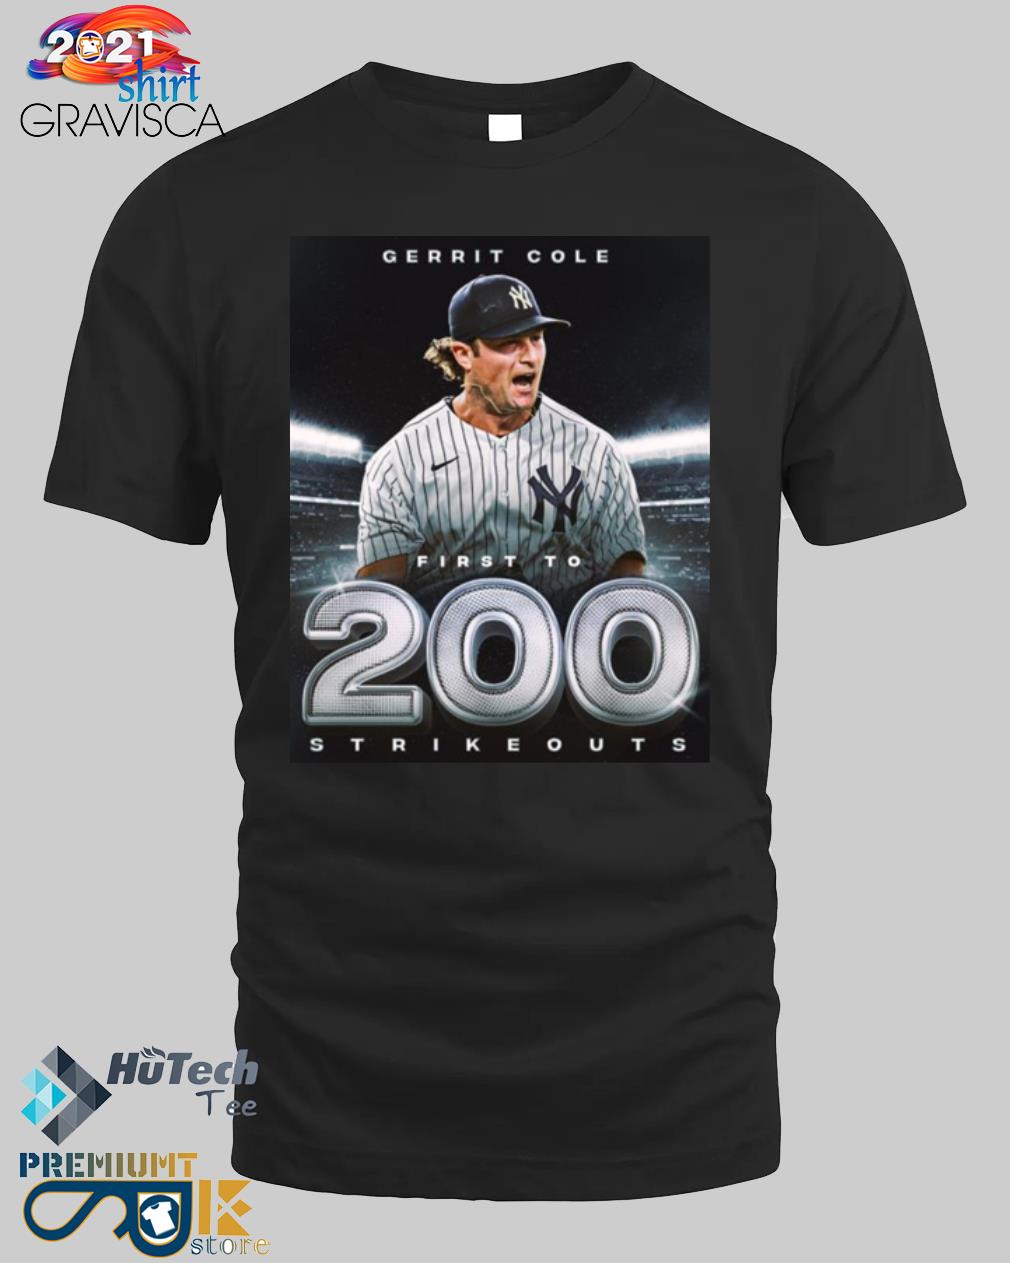 2022 gerrit cole first to 200 strikeouts new york yankees shirt